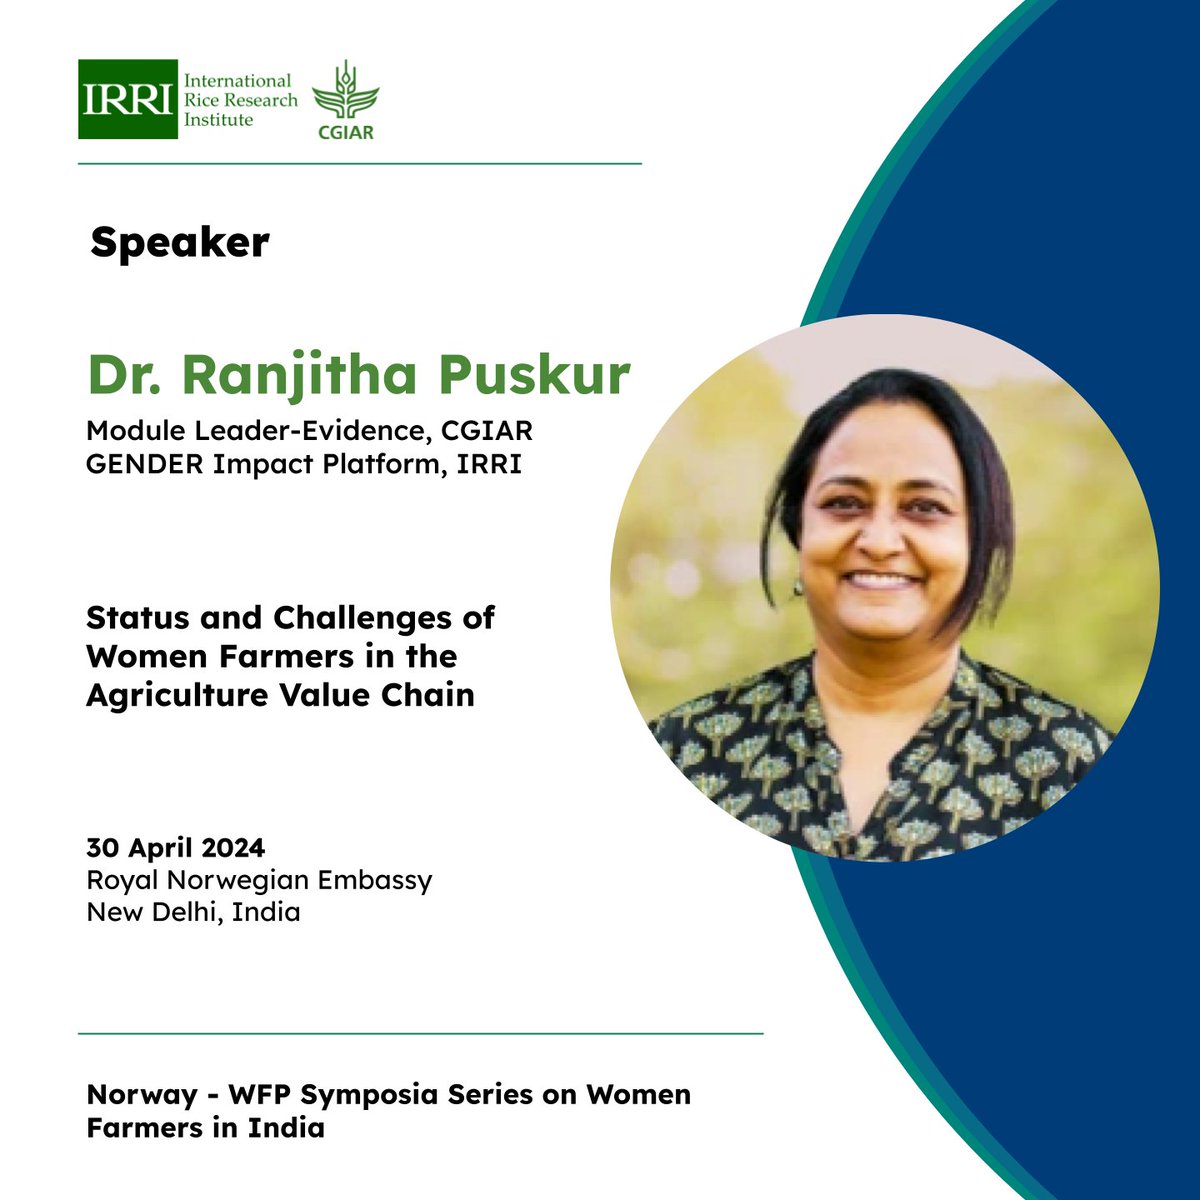 📢SPEAKER ANNOUNCEMENT 📢

Catch @r_puskur at the @WFP Symposia Series on Women Farmers in India as she talks about the status and challenges of #RuralWomen in the agri-value chain.

🗓️30 April 2024
🕞 10.00 AM to 12.00 PM (IST)
🇮🇳New Delhi, India

#WomenInAgriculture